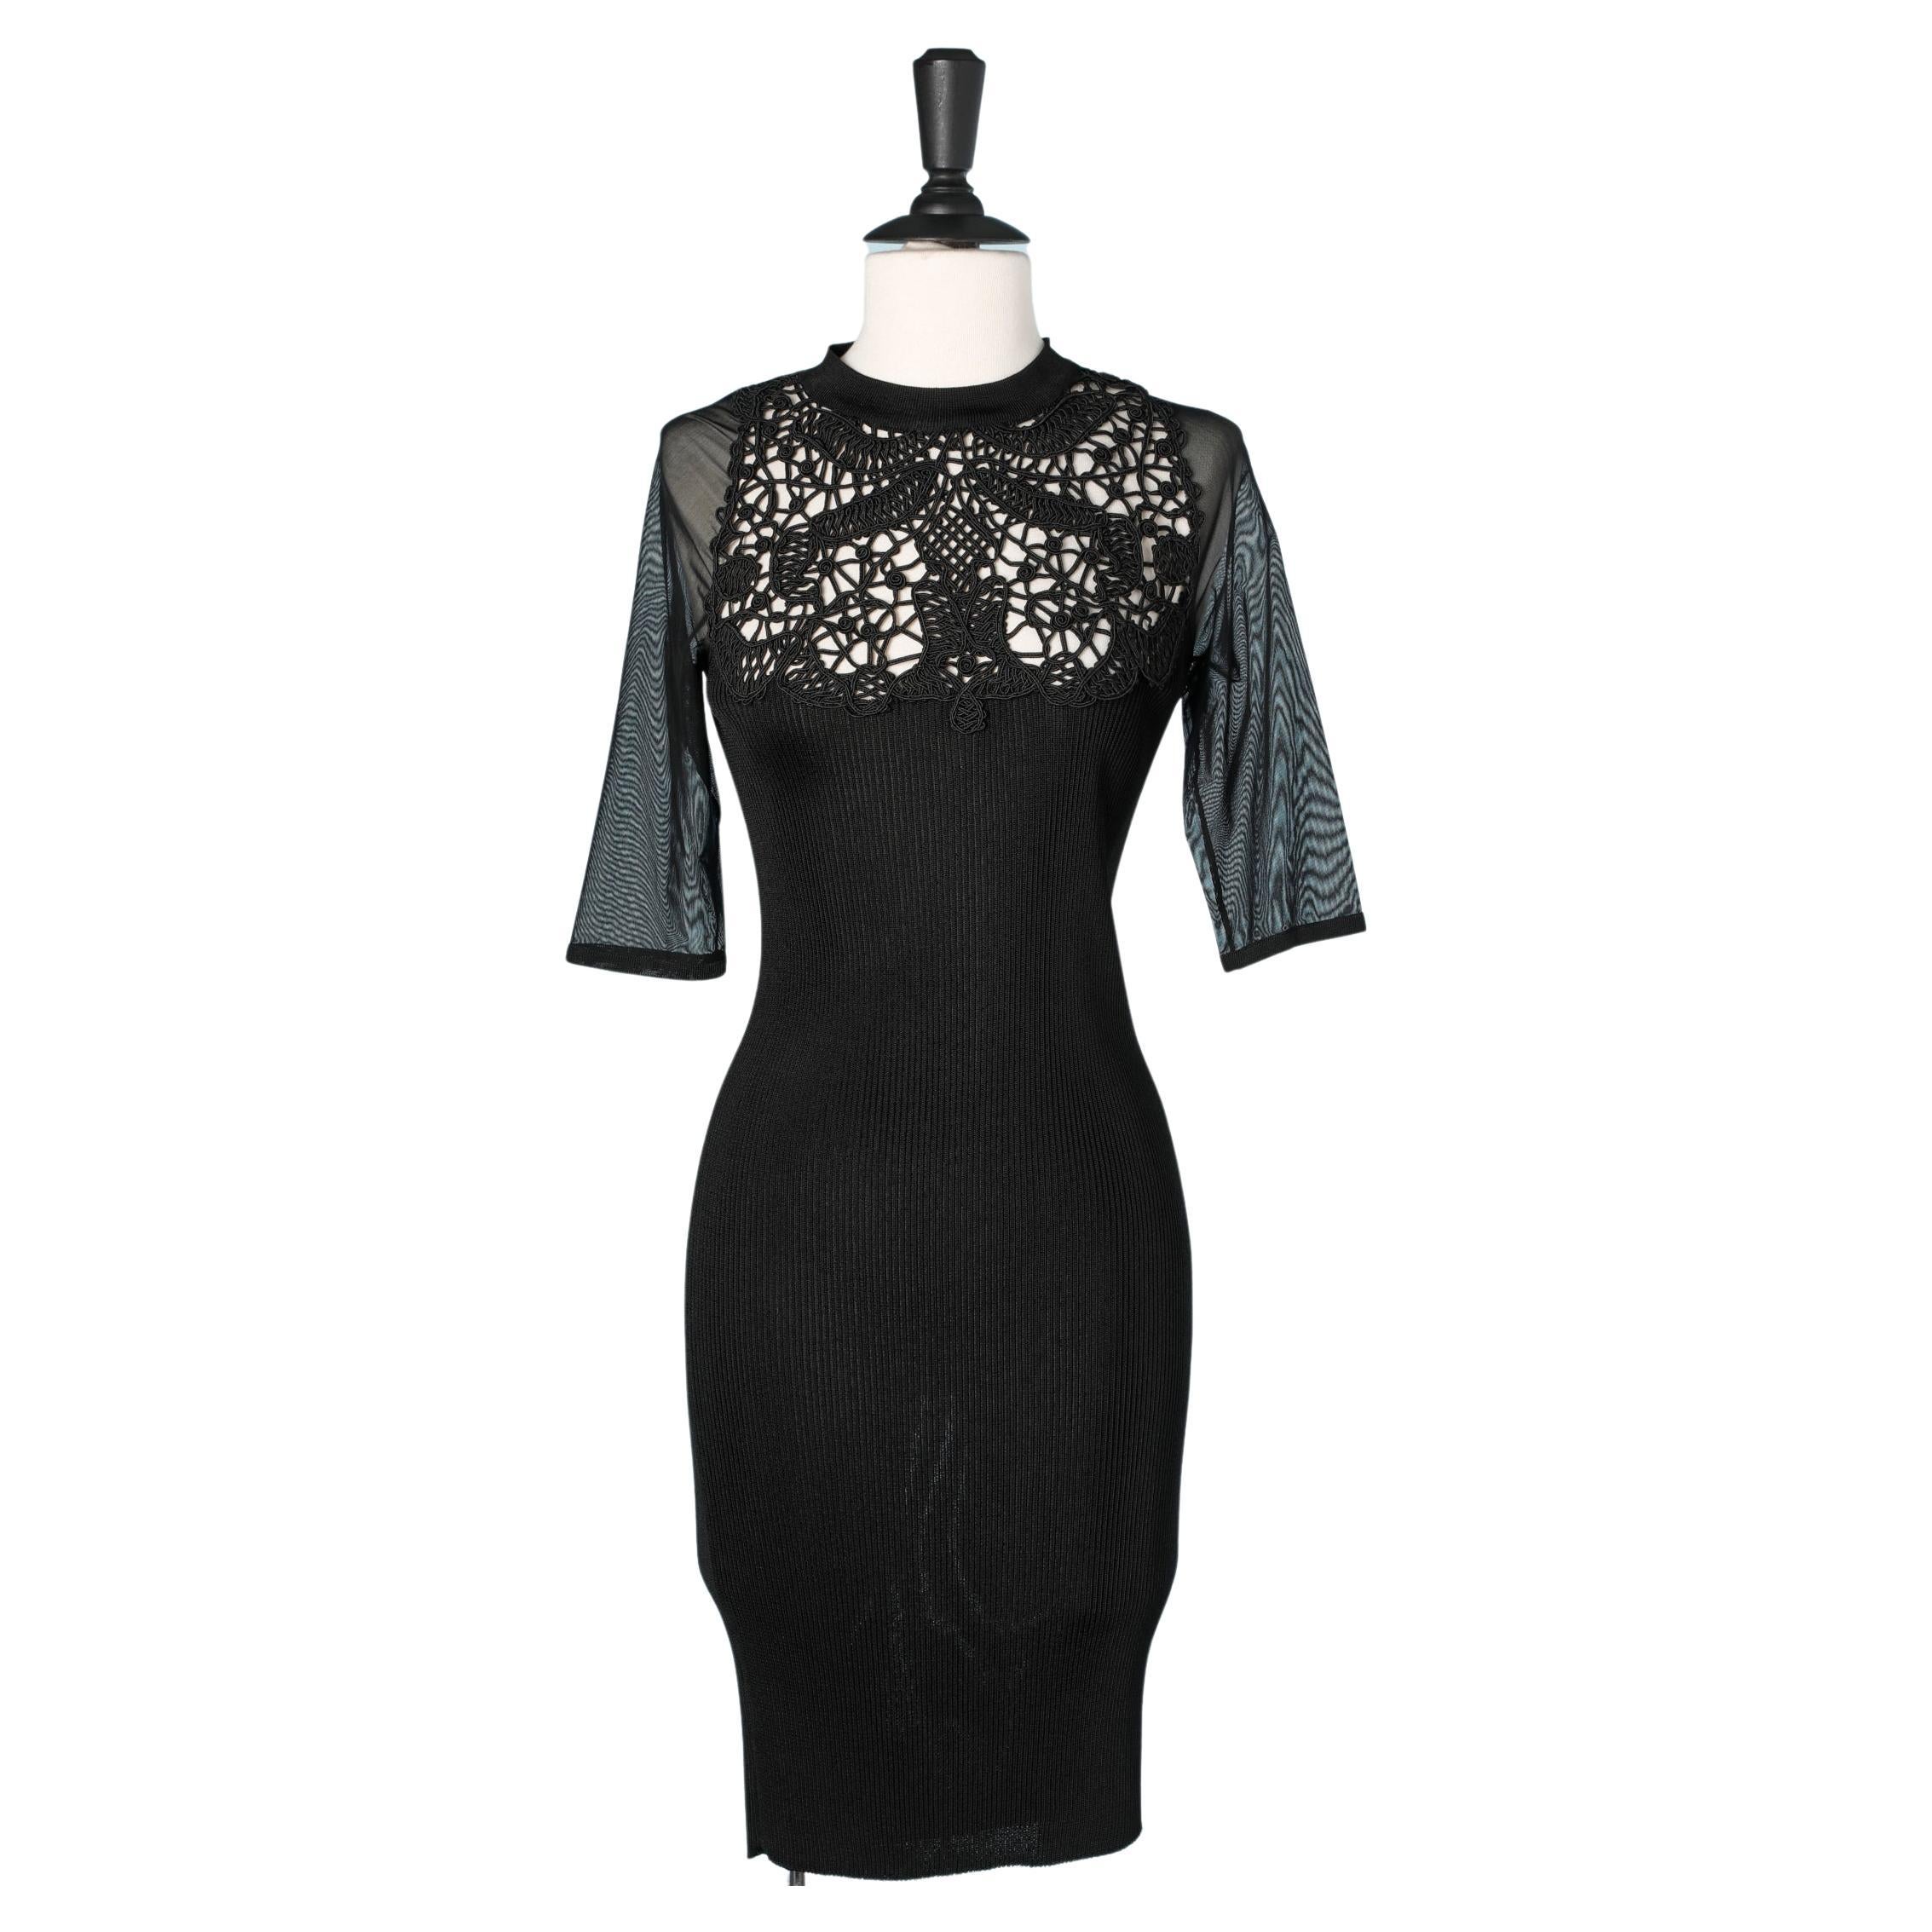 Black knit dress with passementerie lace on the cut off  Christian Lacroix  For Sale